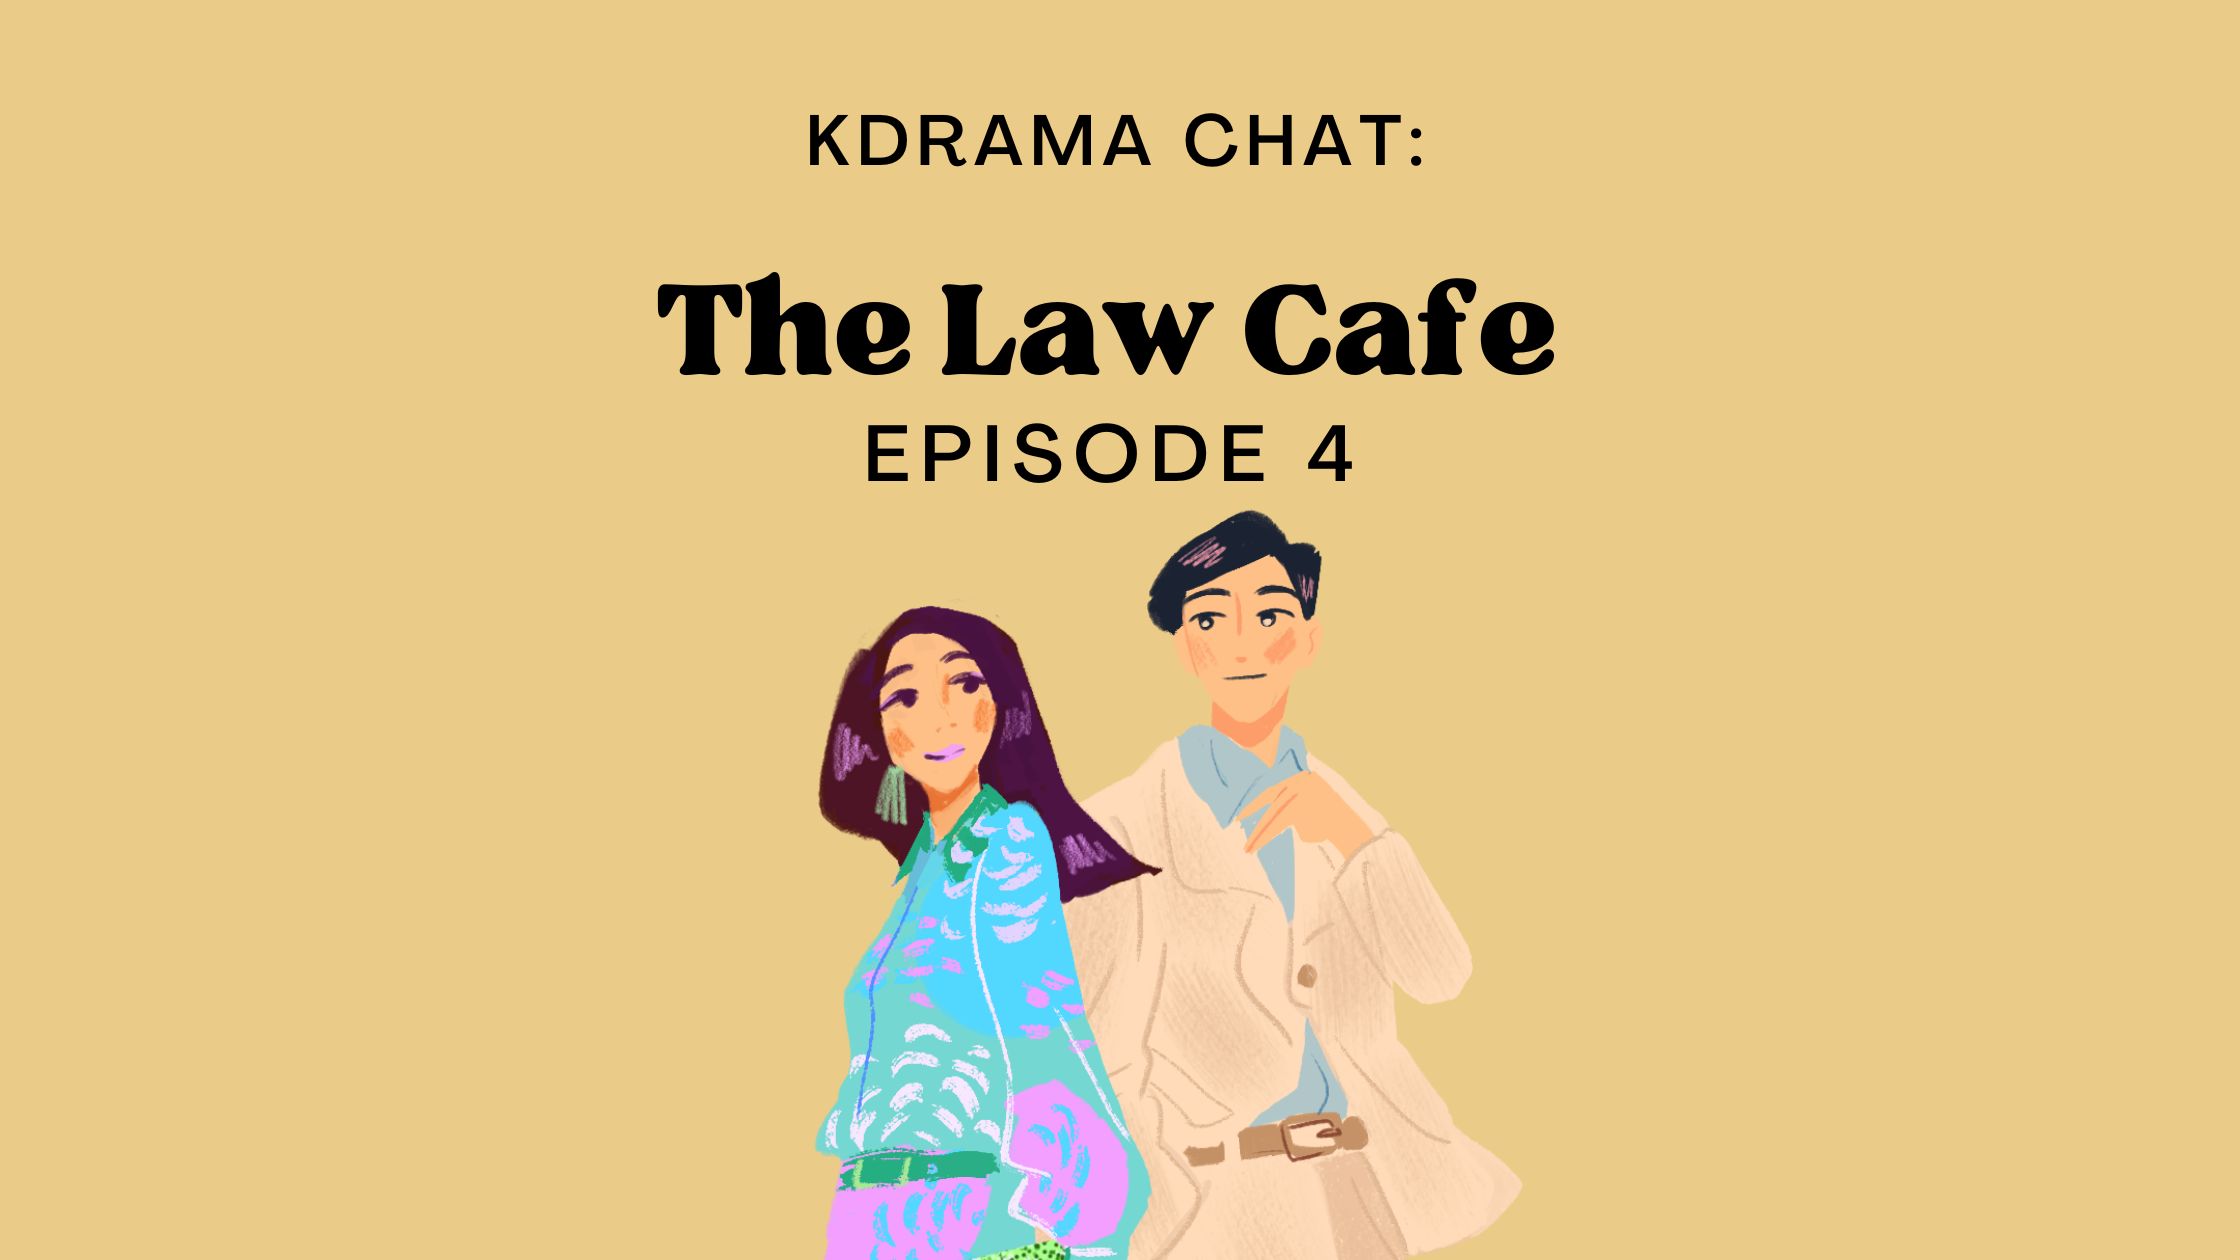 KDrama Chat: The Law Cafe Episode 4